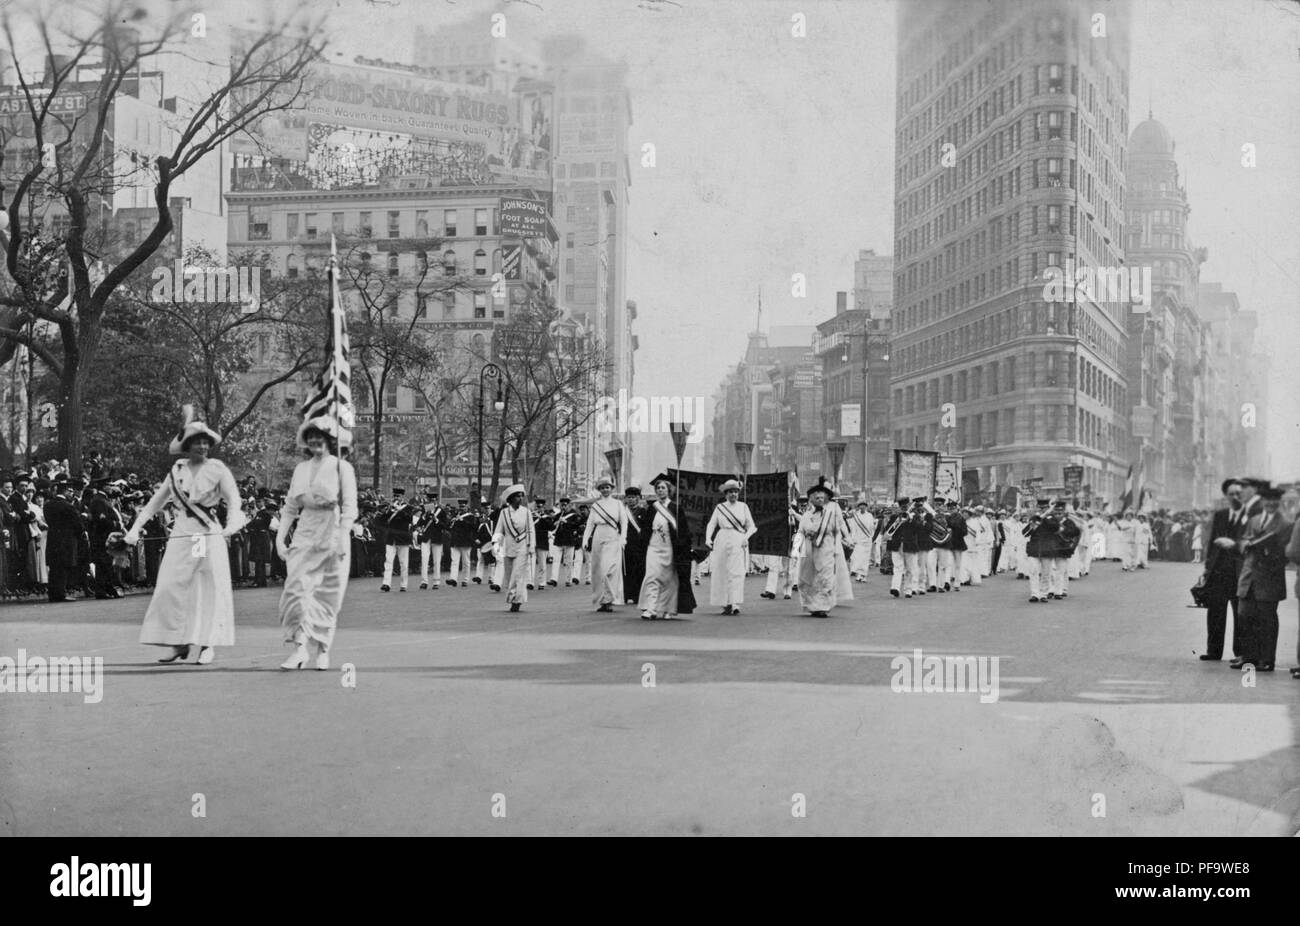 Black and white photograph showing several women, wearing white Edwardian clothing, and sashes, and holding a US flag and pennants, followed by a marching band, taking part in a suffrage parade in New York City, 1913. () Stock Photo